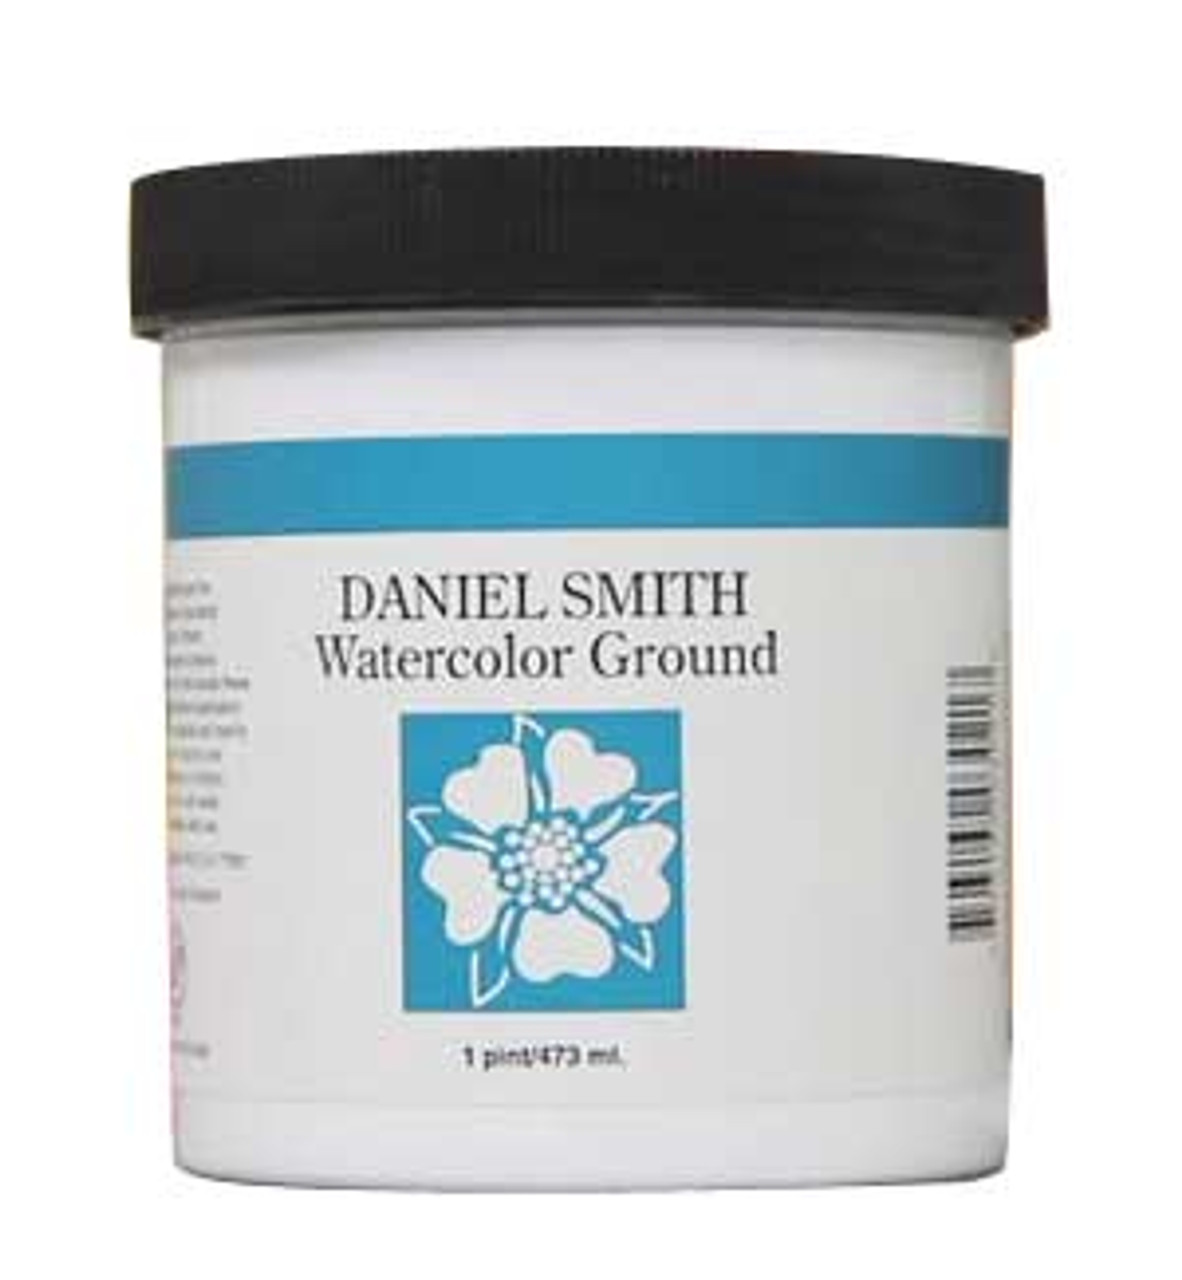 Daniel Smith Watercolor Ground 16oz Buff Titanium - Wet Paint Artists'  Materials and Framing